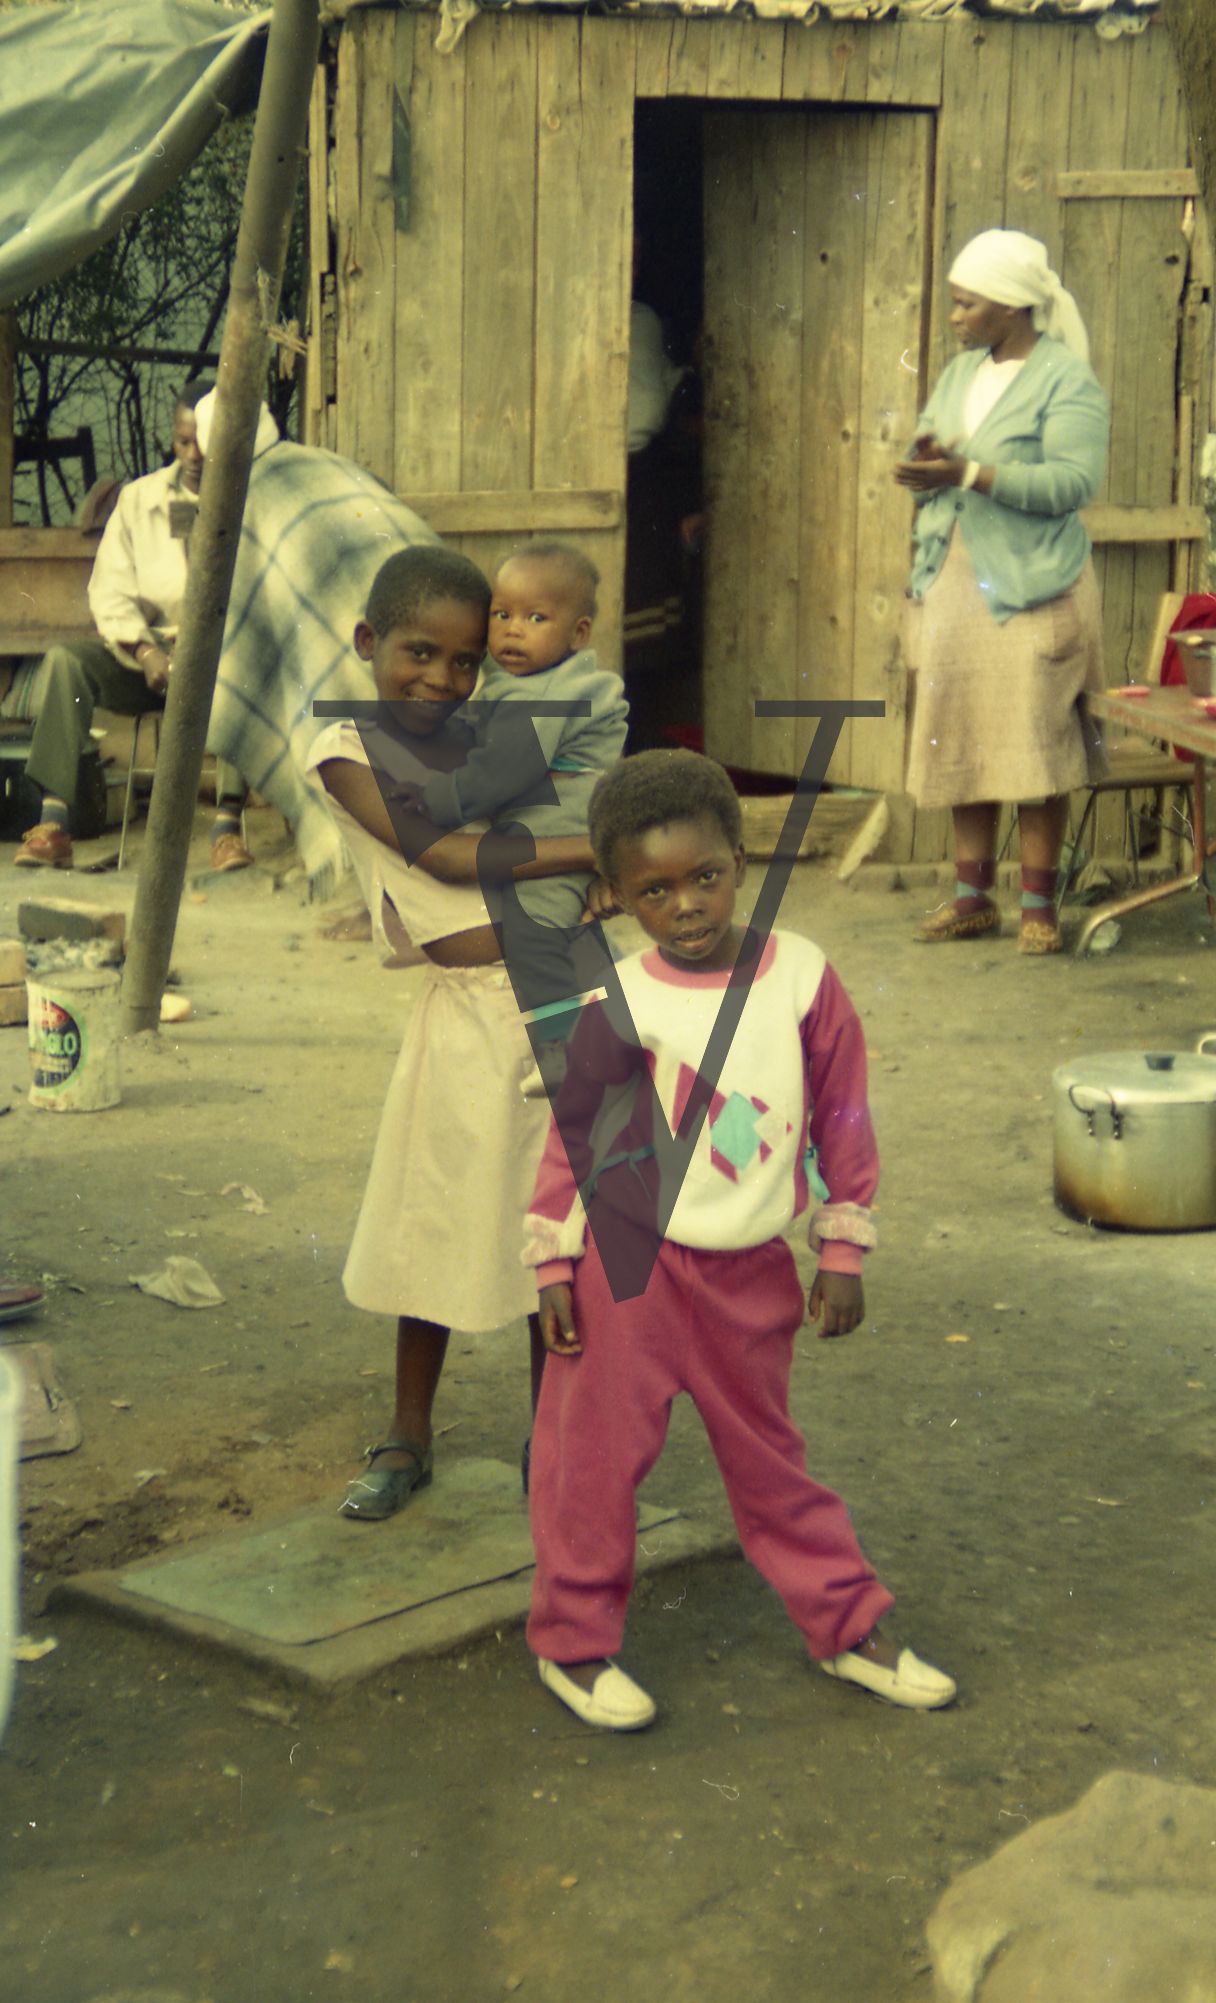 South Africa, shanty town, children, young girl carrying infant, portrait.